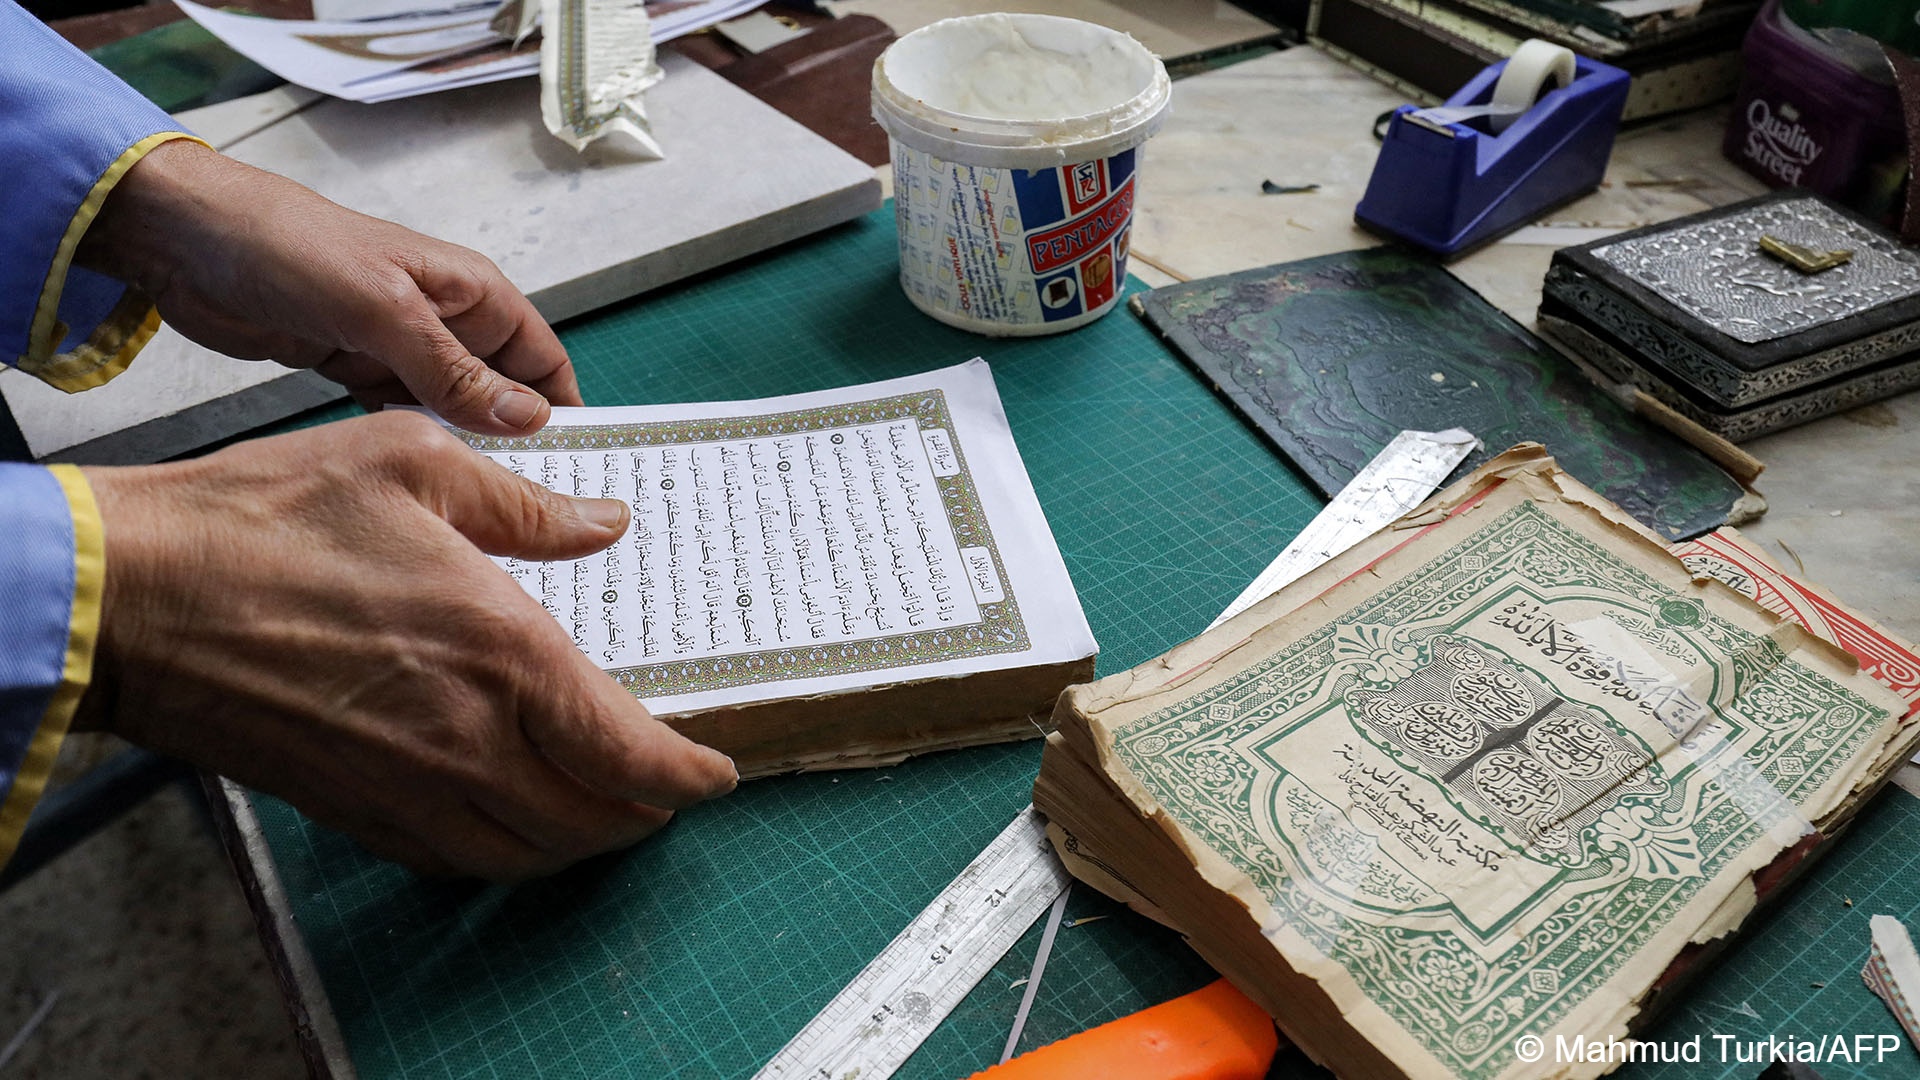  A workshop in Tripoli allows Libyans to revive copies of the Koran with sentimental value, often passed on to them by loved ones (photo: Mahmud Turkia/AFP) 